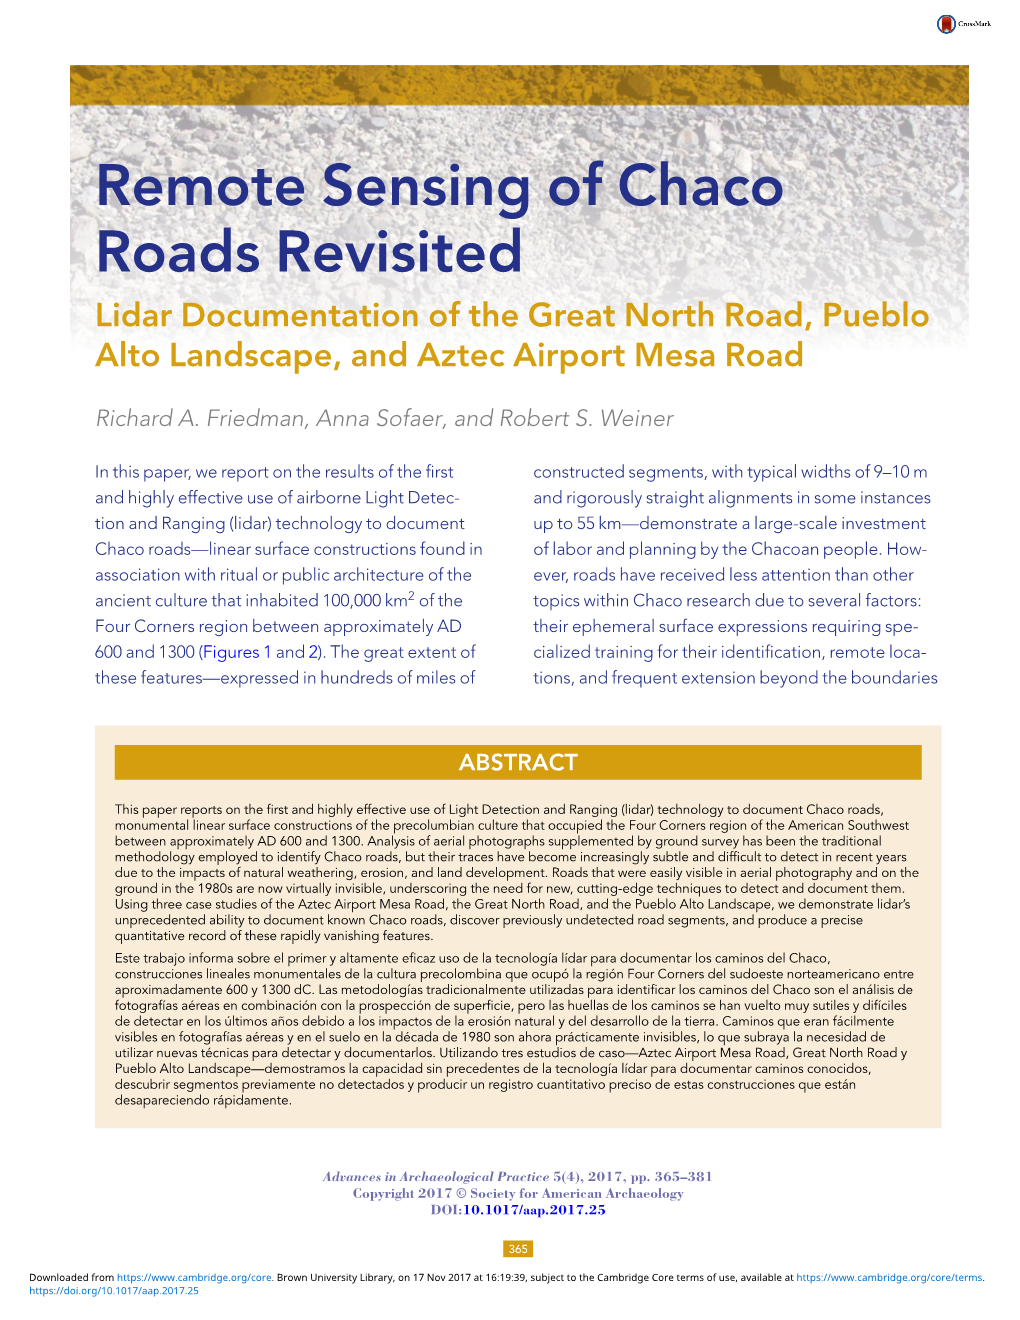 Remote Sensing of Chaco Roads Revisited Lidar Documentation of the Great North Road, Pueblo Alto Landscape, and Aztec Airport Mesa Road